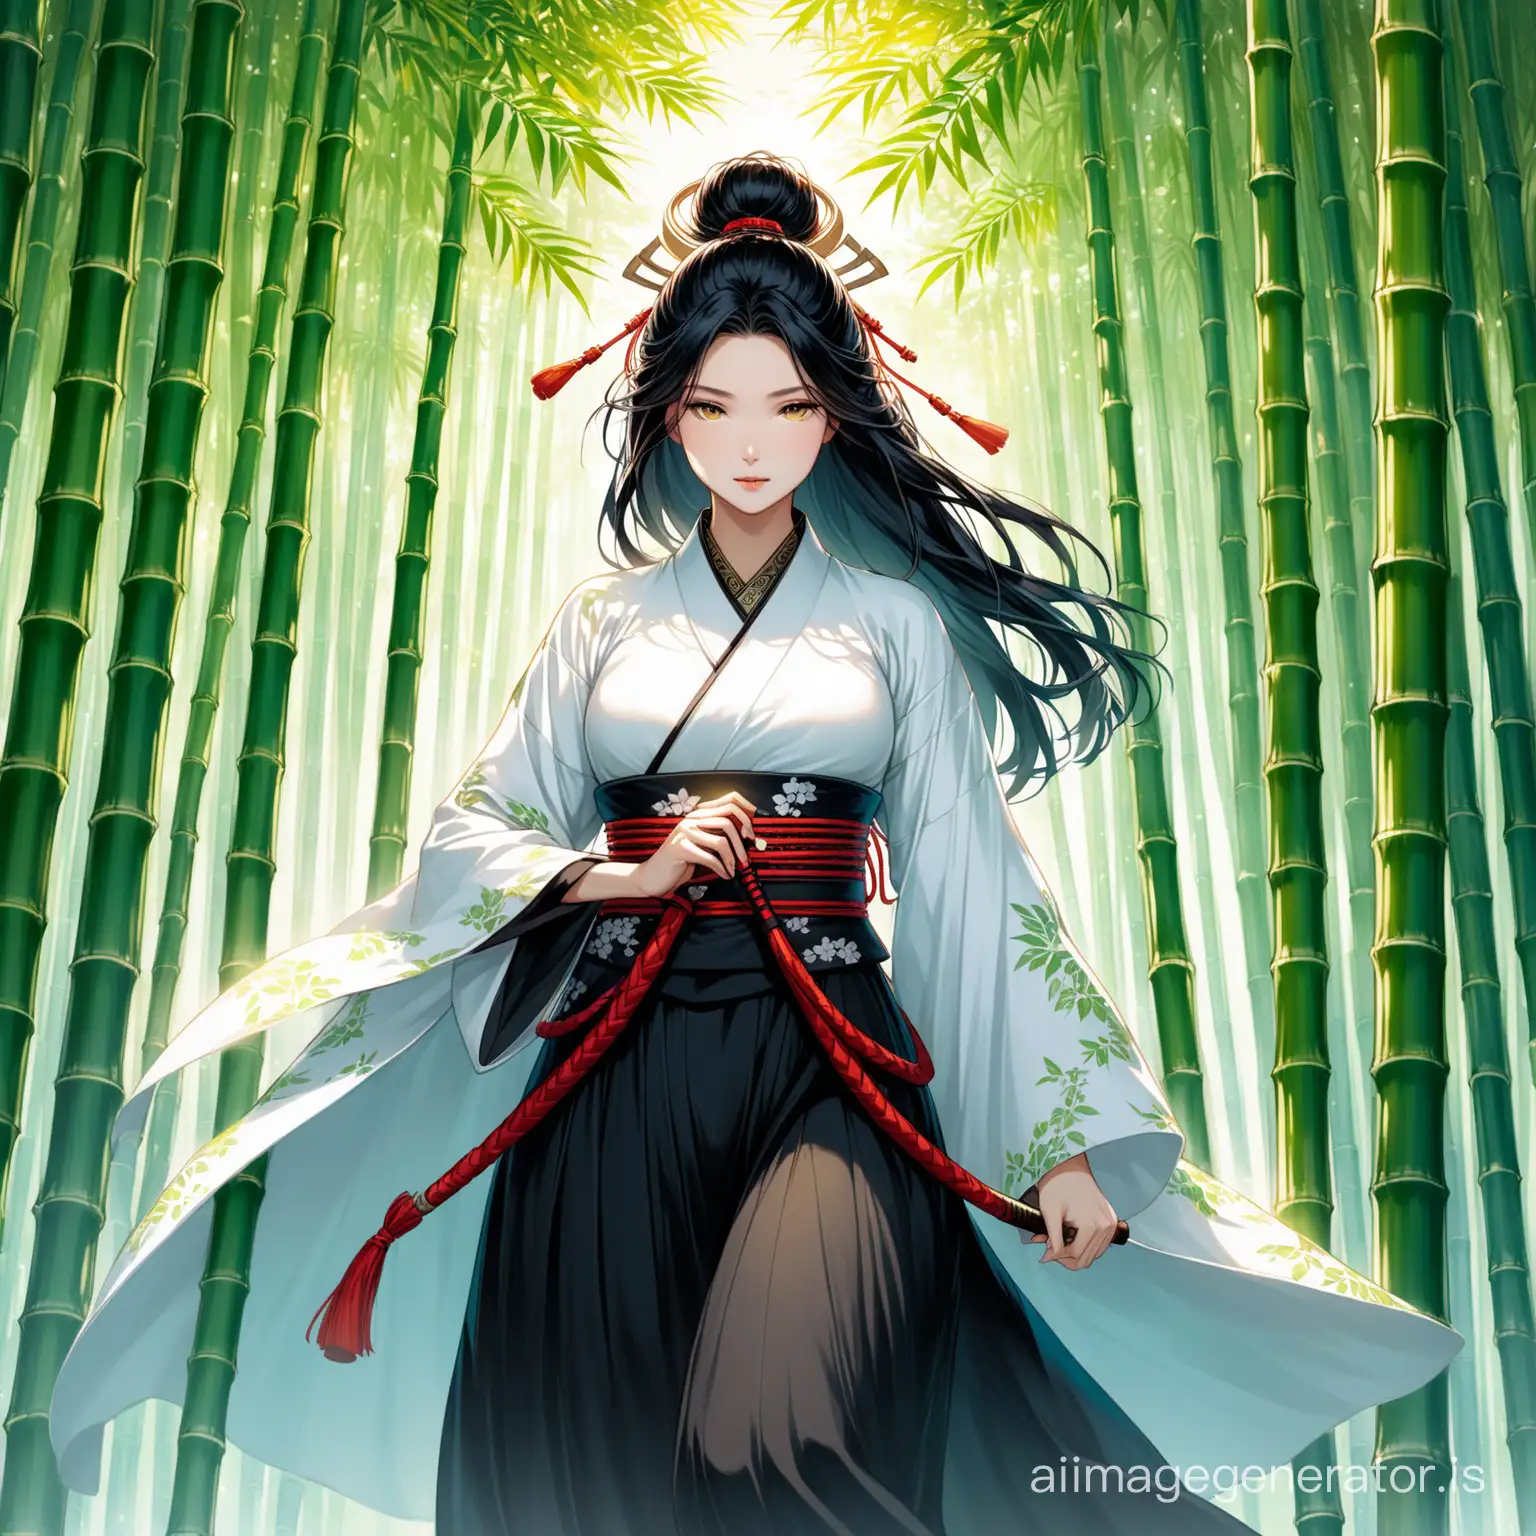 Mysterious-Female-Samurai-in-Harmony-with-Nature